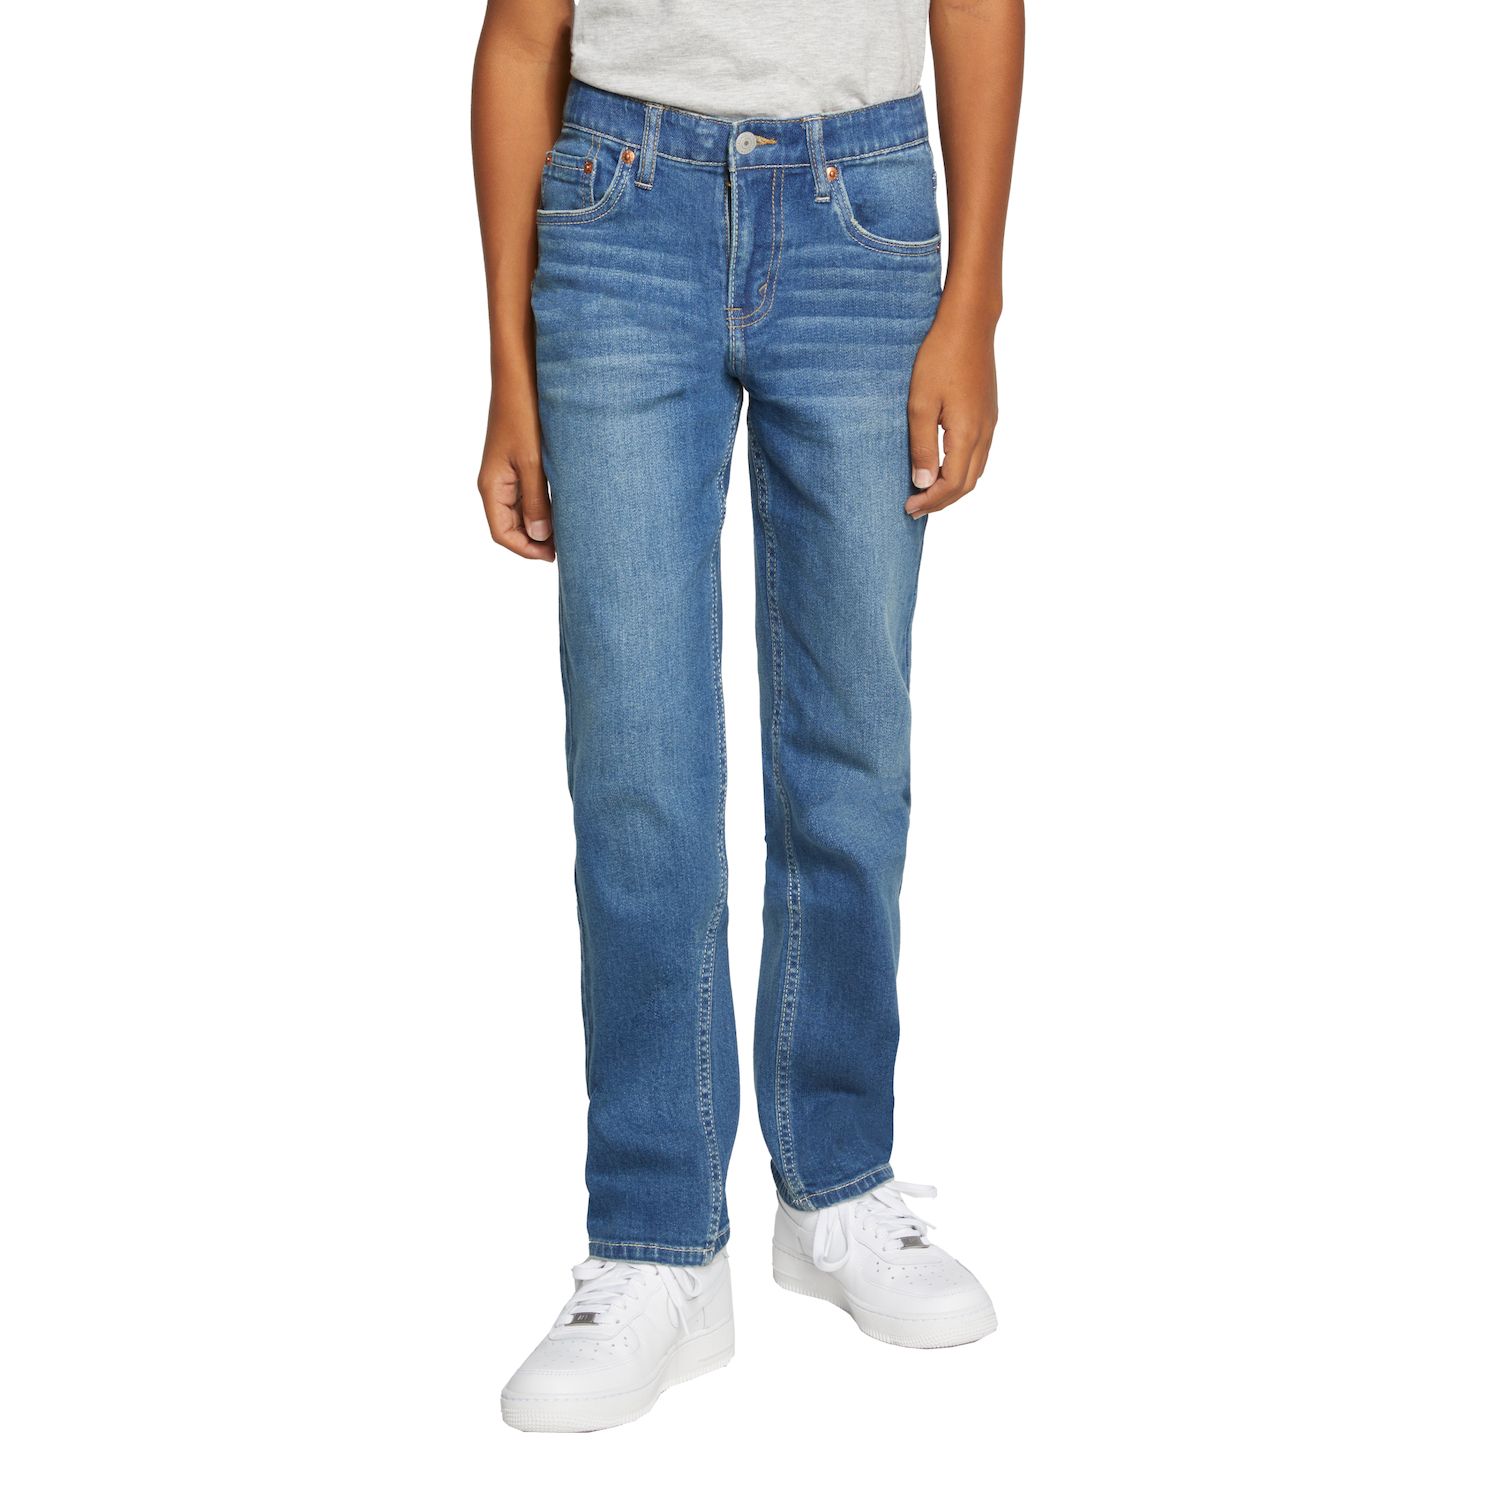 Image for Levi's Boys 4-20 514 Straight Fit Flex Stretch Jeans at Kohl's.